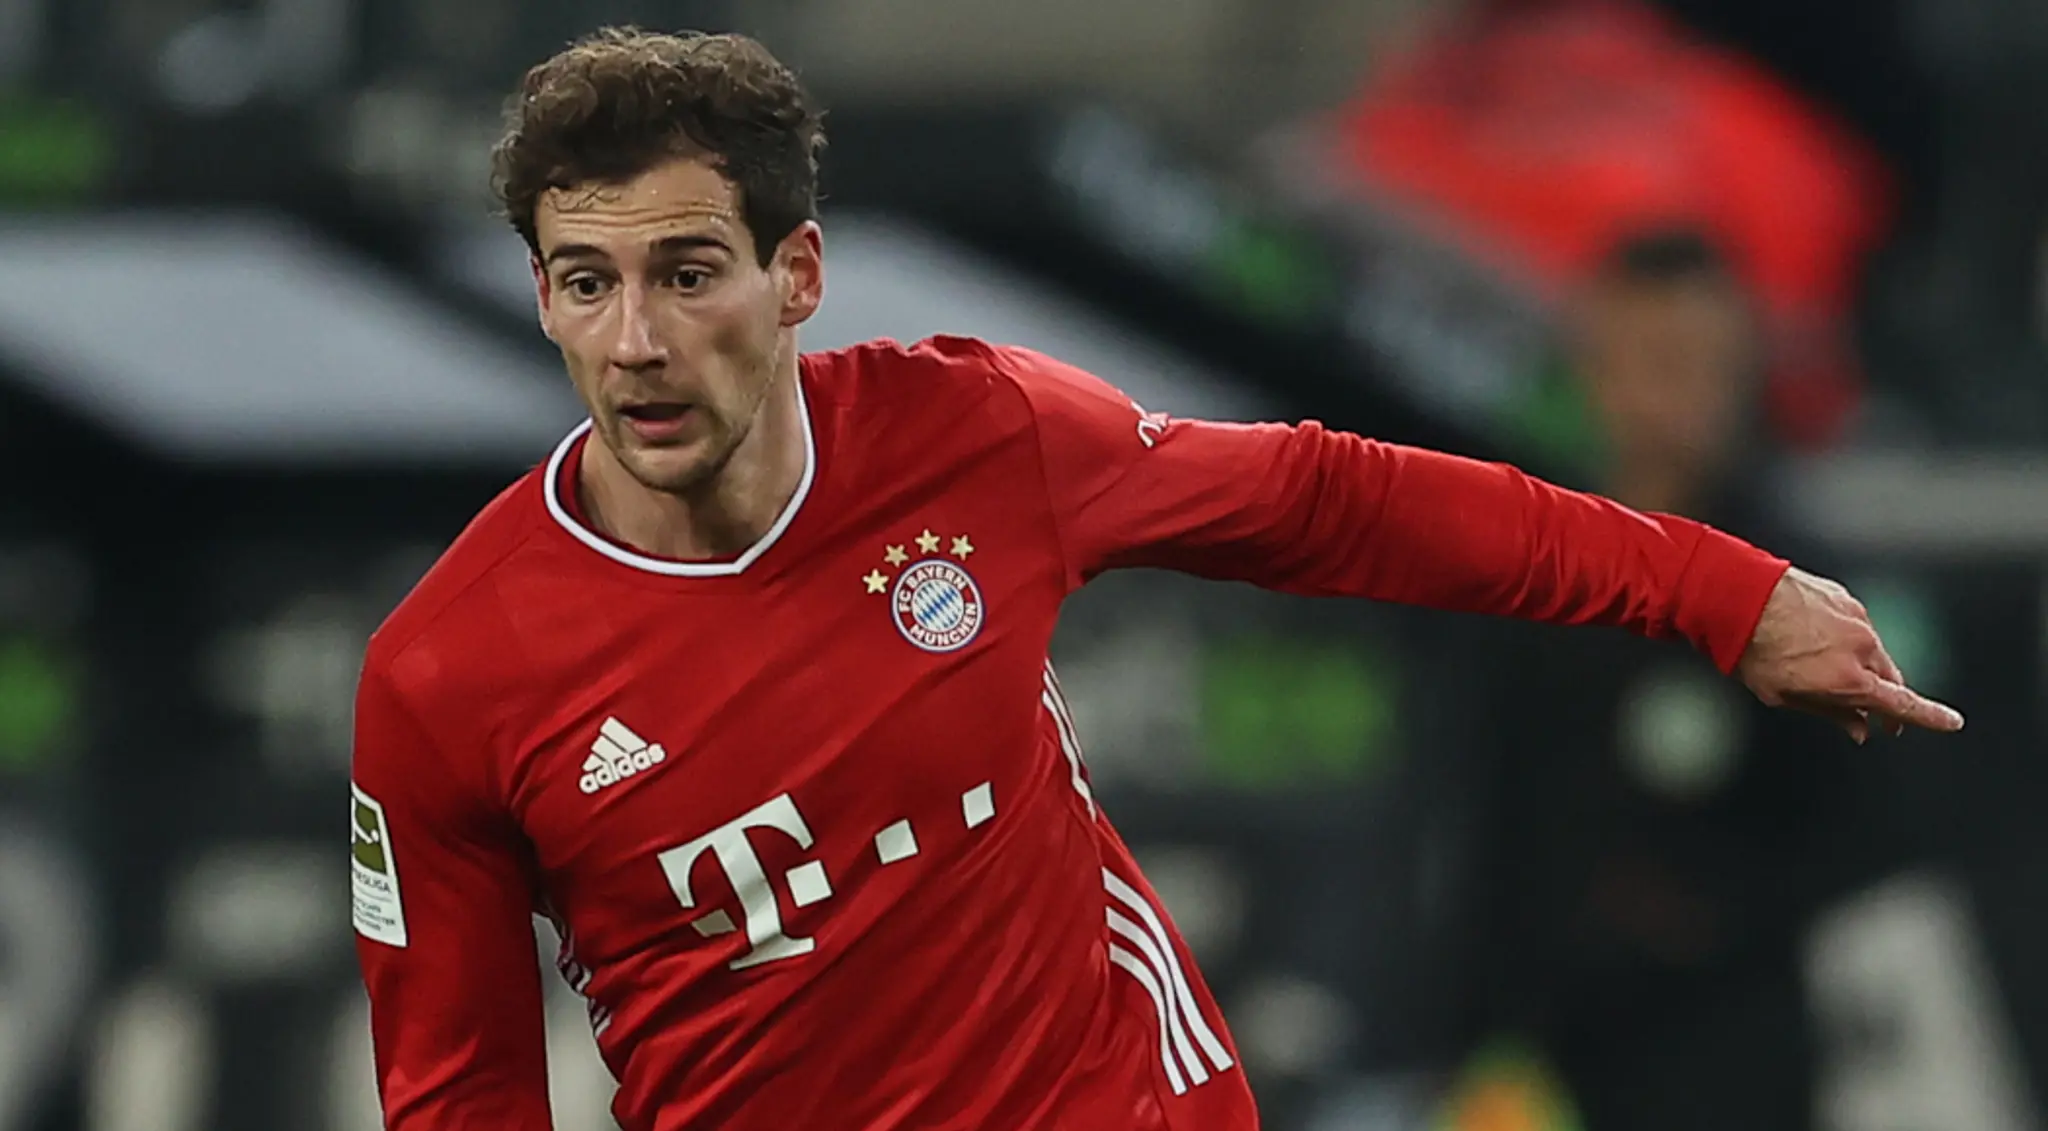 Juventus held a summit with Bayern Munich about ten days ago. The two powerhouses have often done business together on the transfer market in recent years.